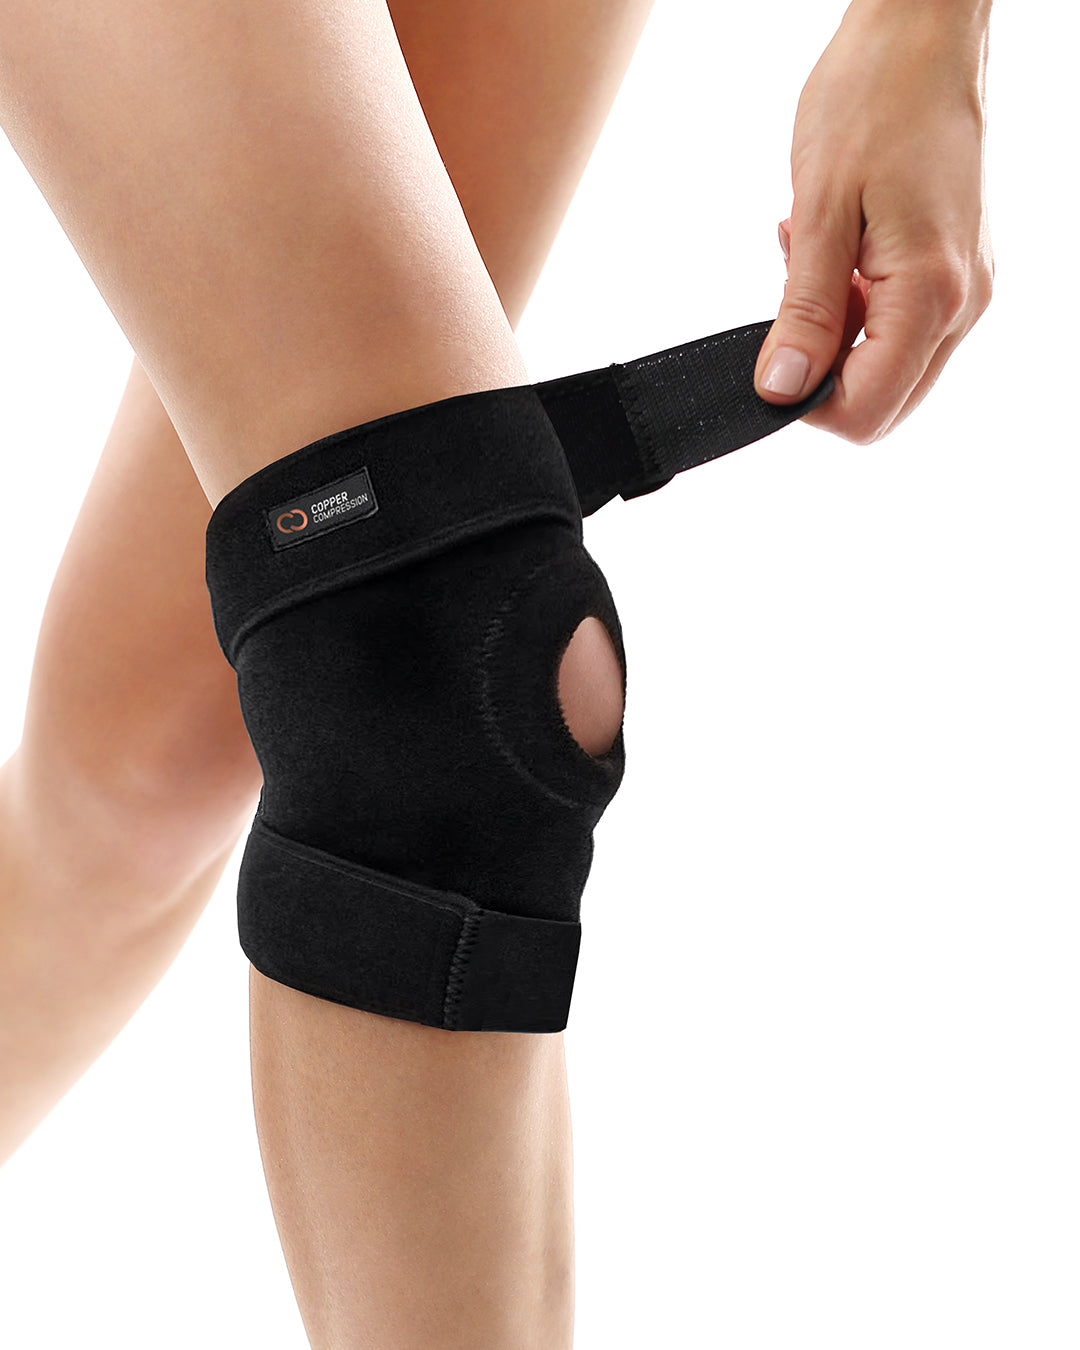 Low MOQ Factory Price Knee Wraps Copper Elbow&Knee Brace Support